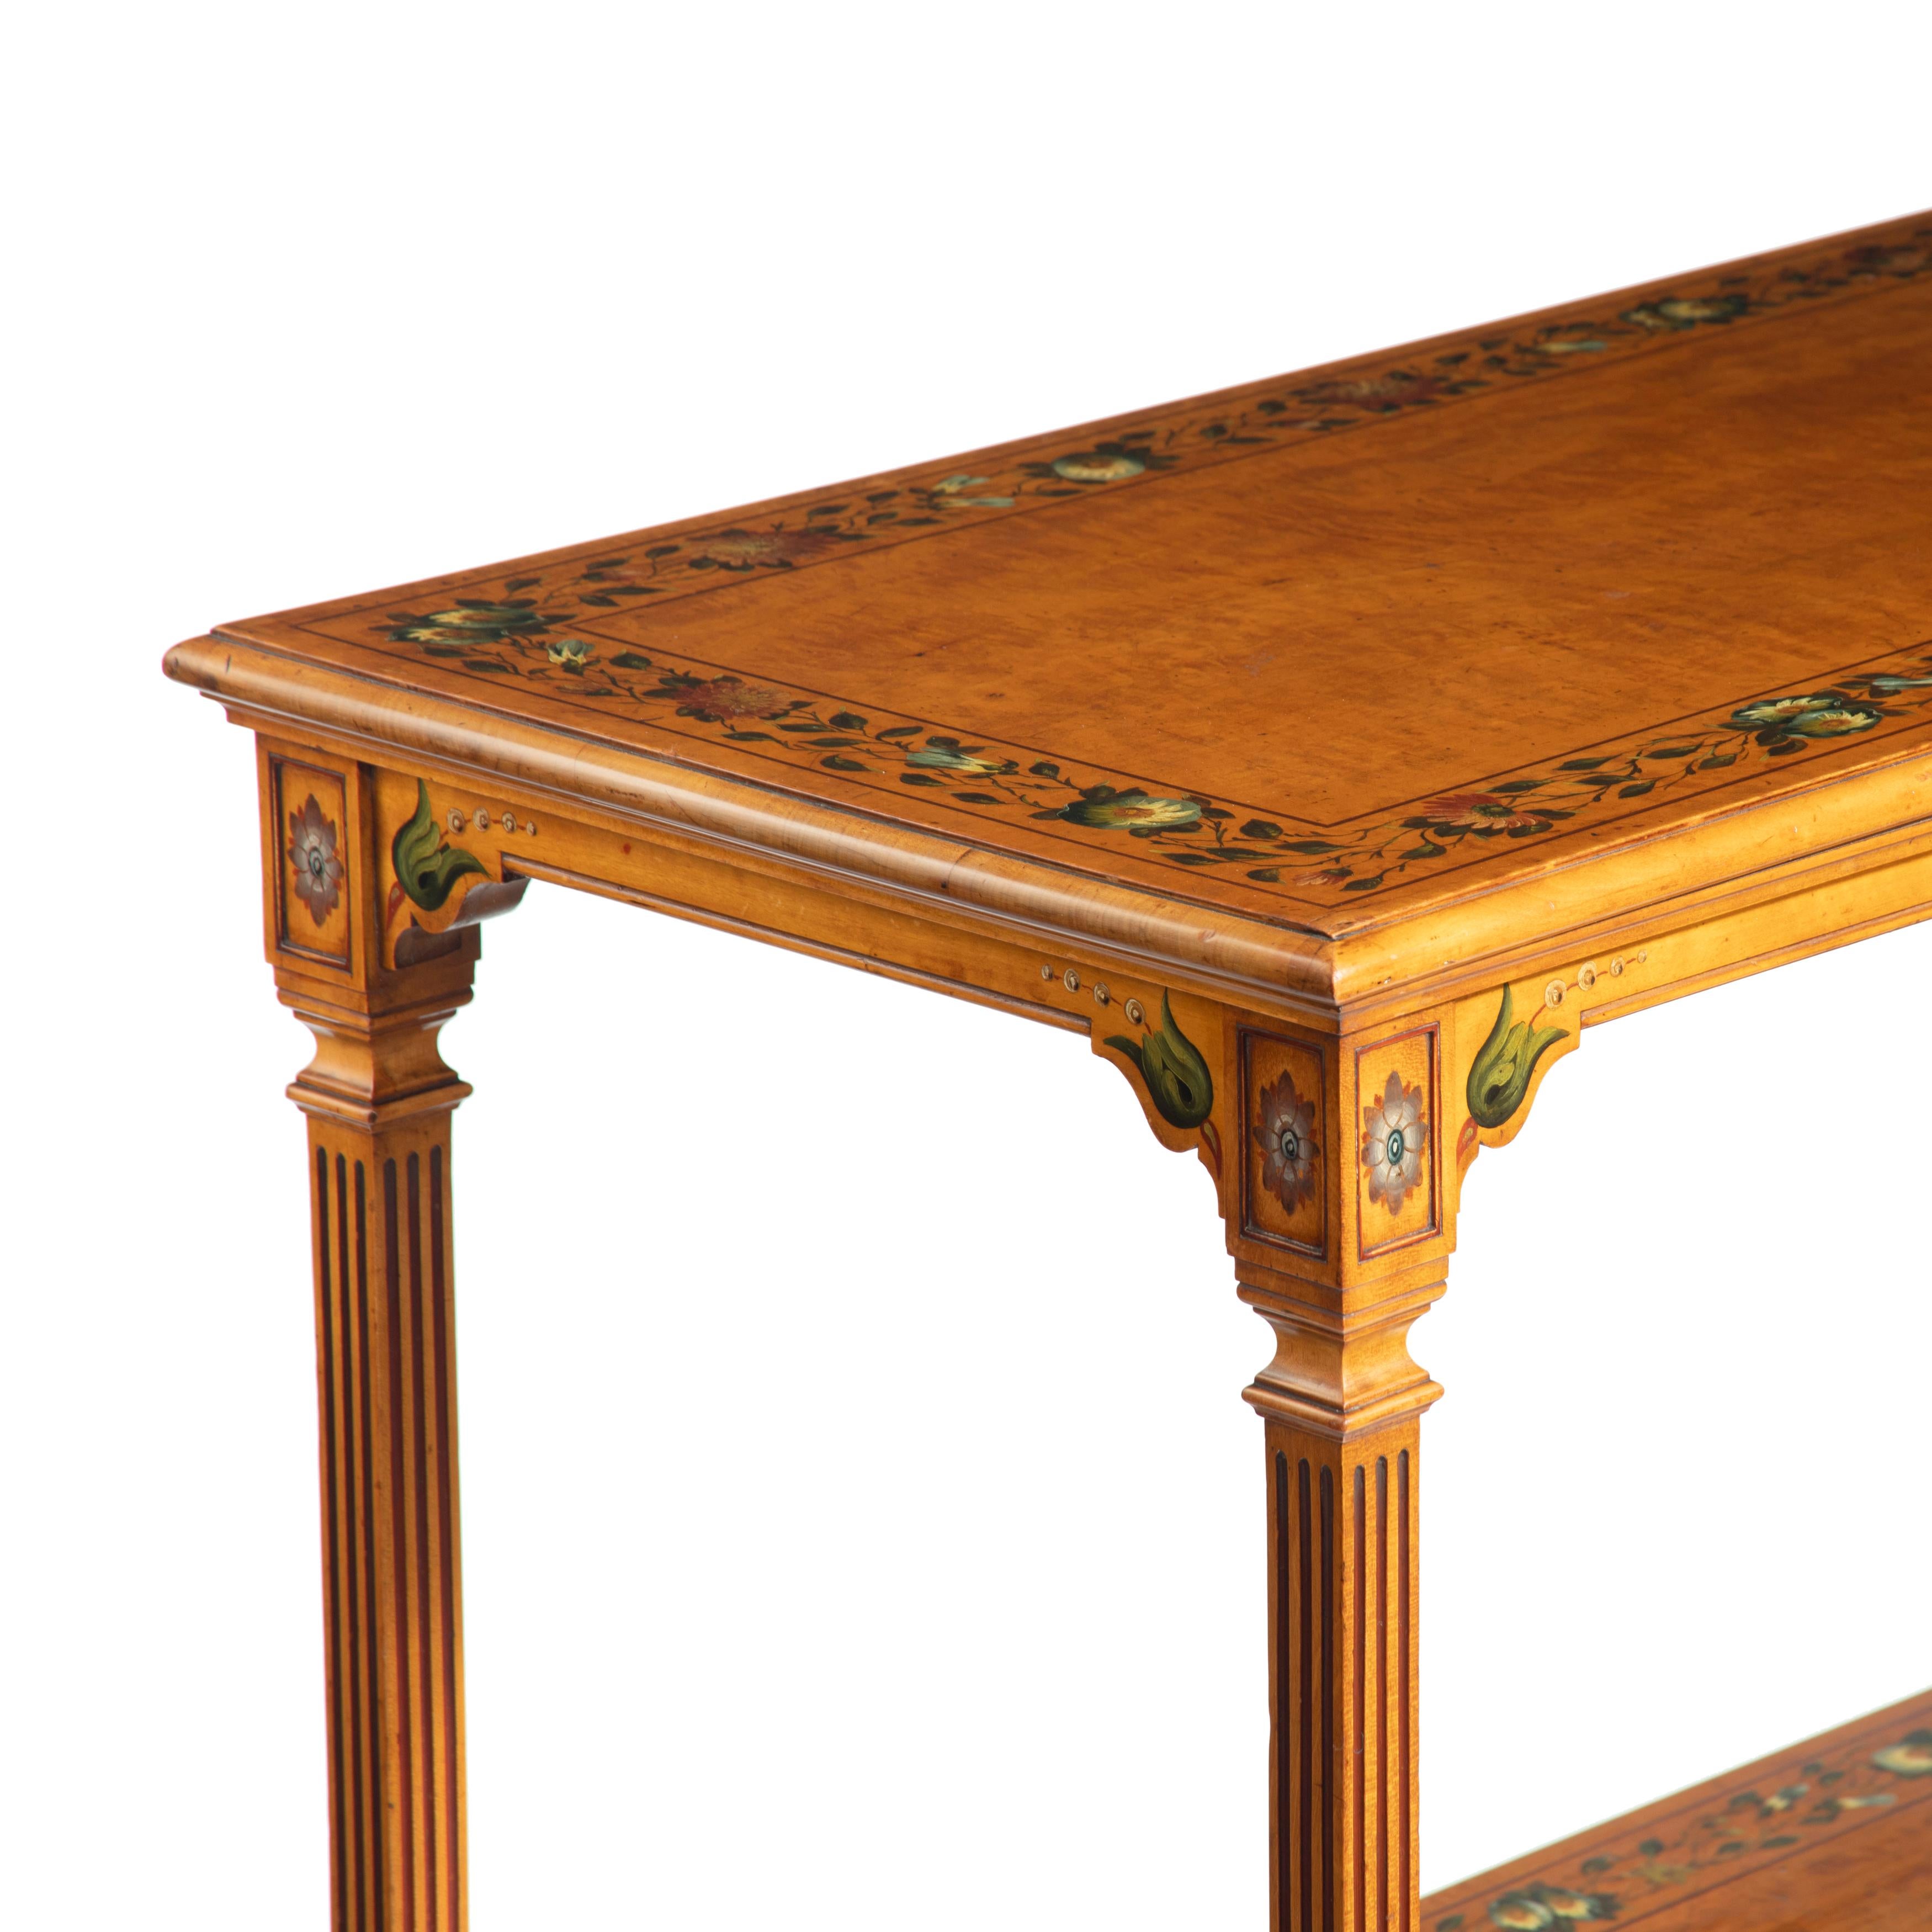 A mid-Victorian free-standing painted satinwood two-tier table, of rectangular form with turned and painted legs, decorated throughout with garlands of flowers, original castors. English, circa 1860.